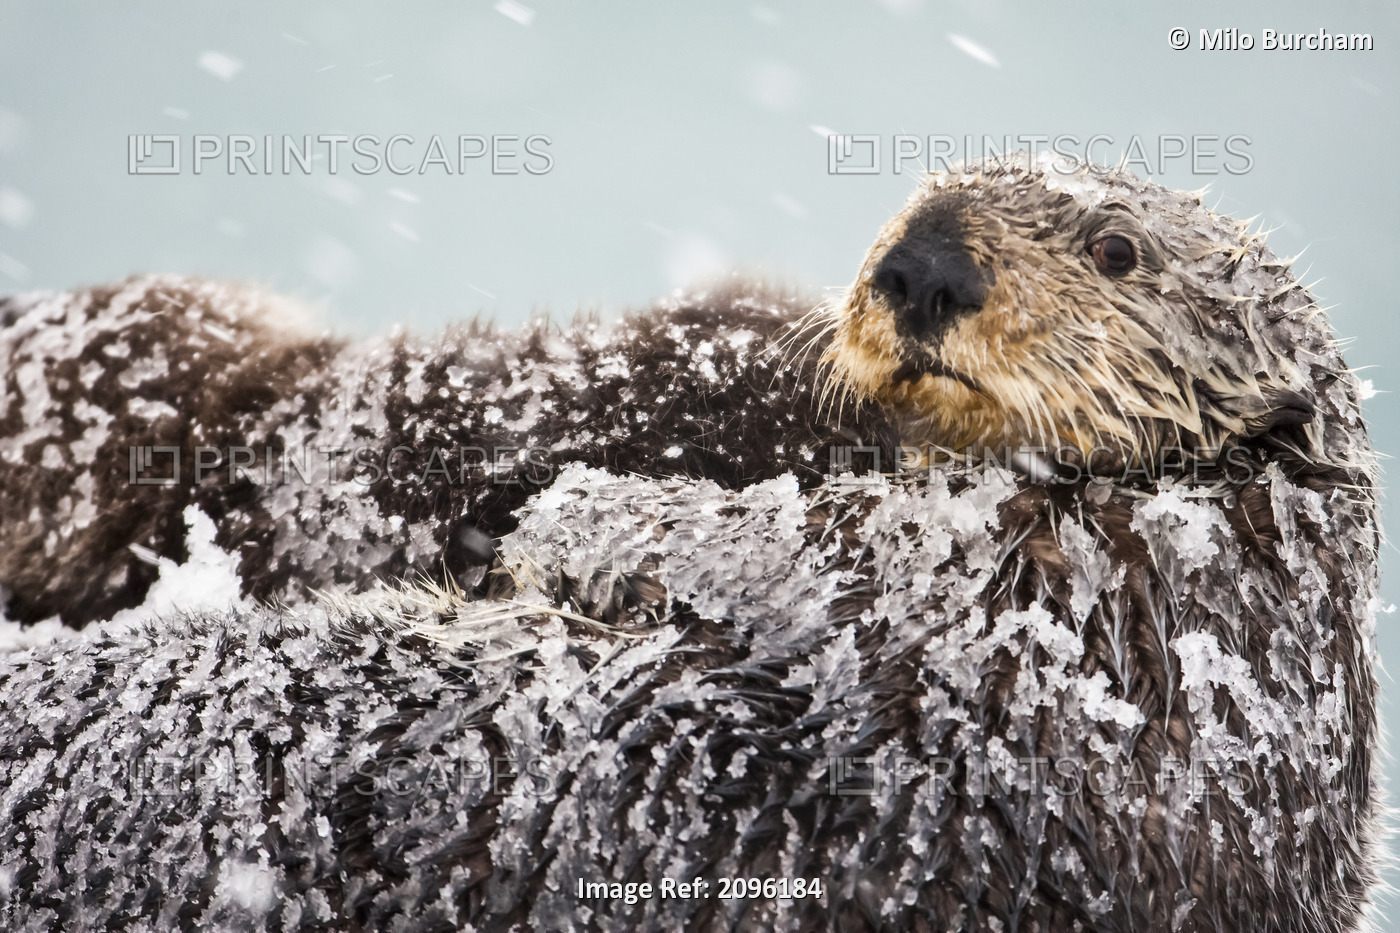 Sea Otter With Snow Covering Fur Holding Newborn Pup During Blizzard, Prince ...